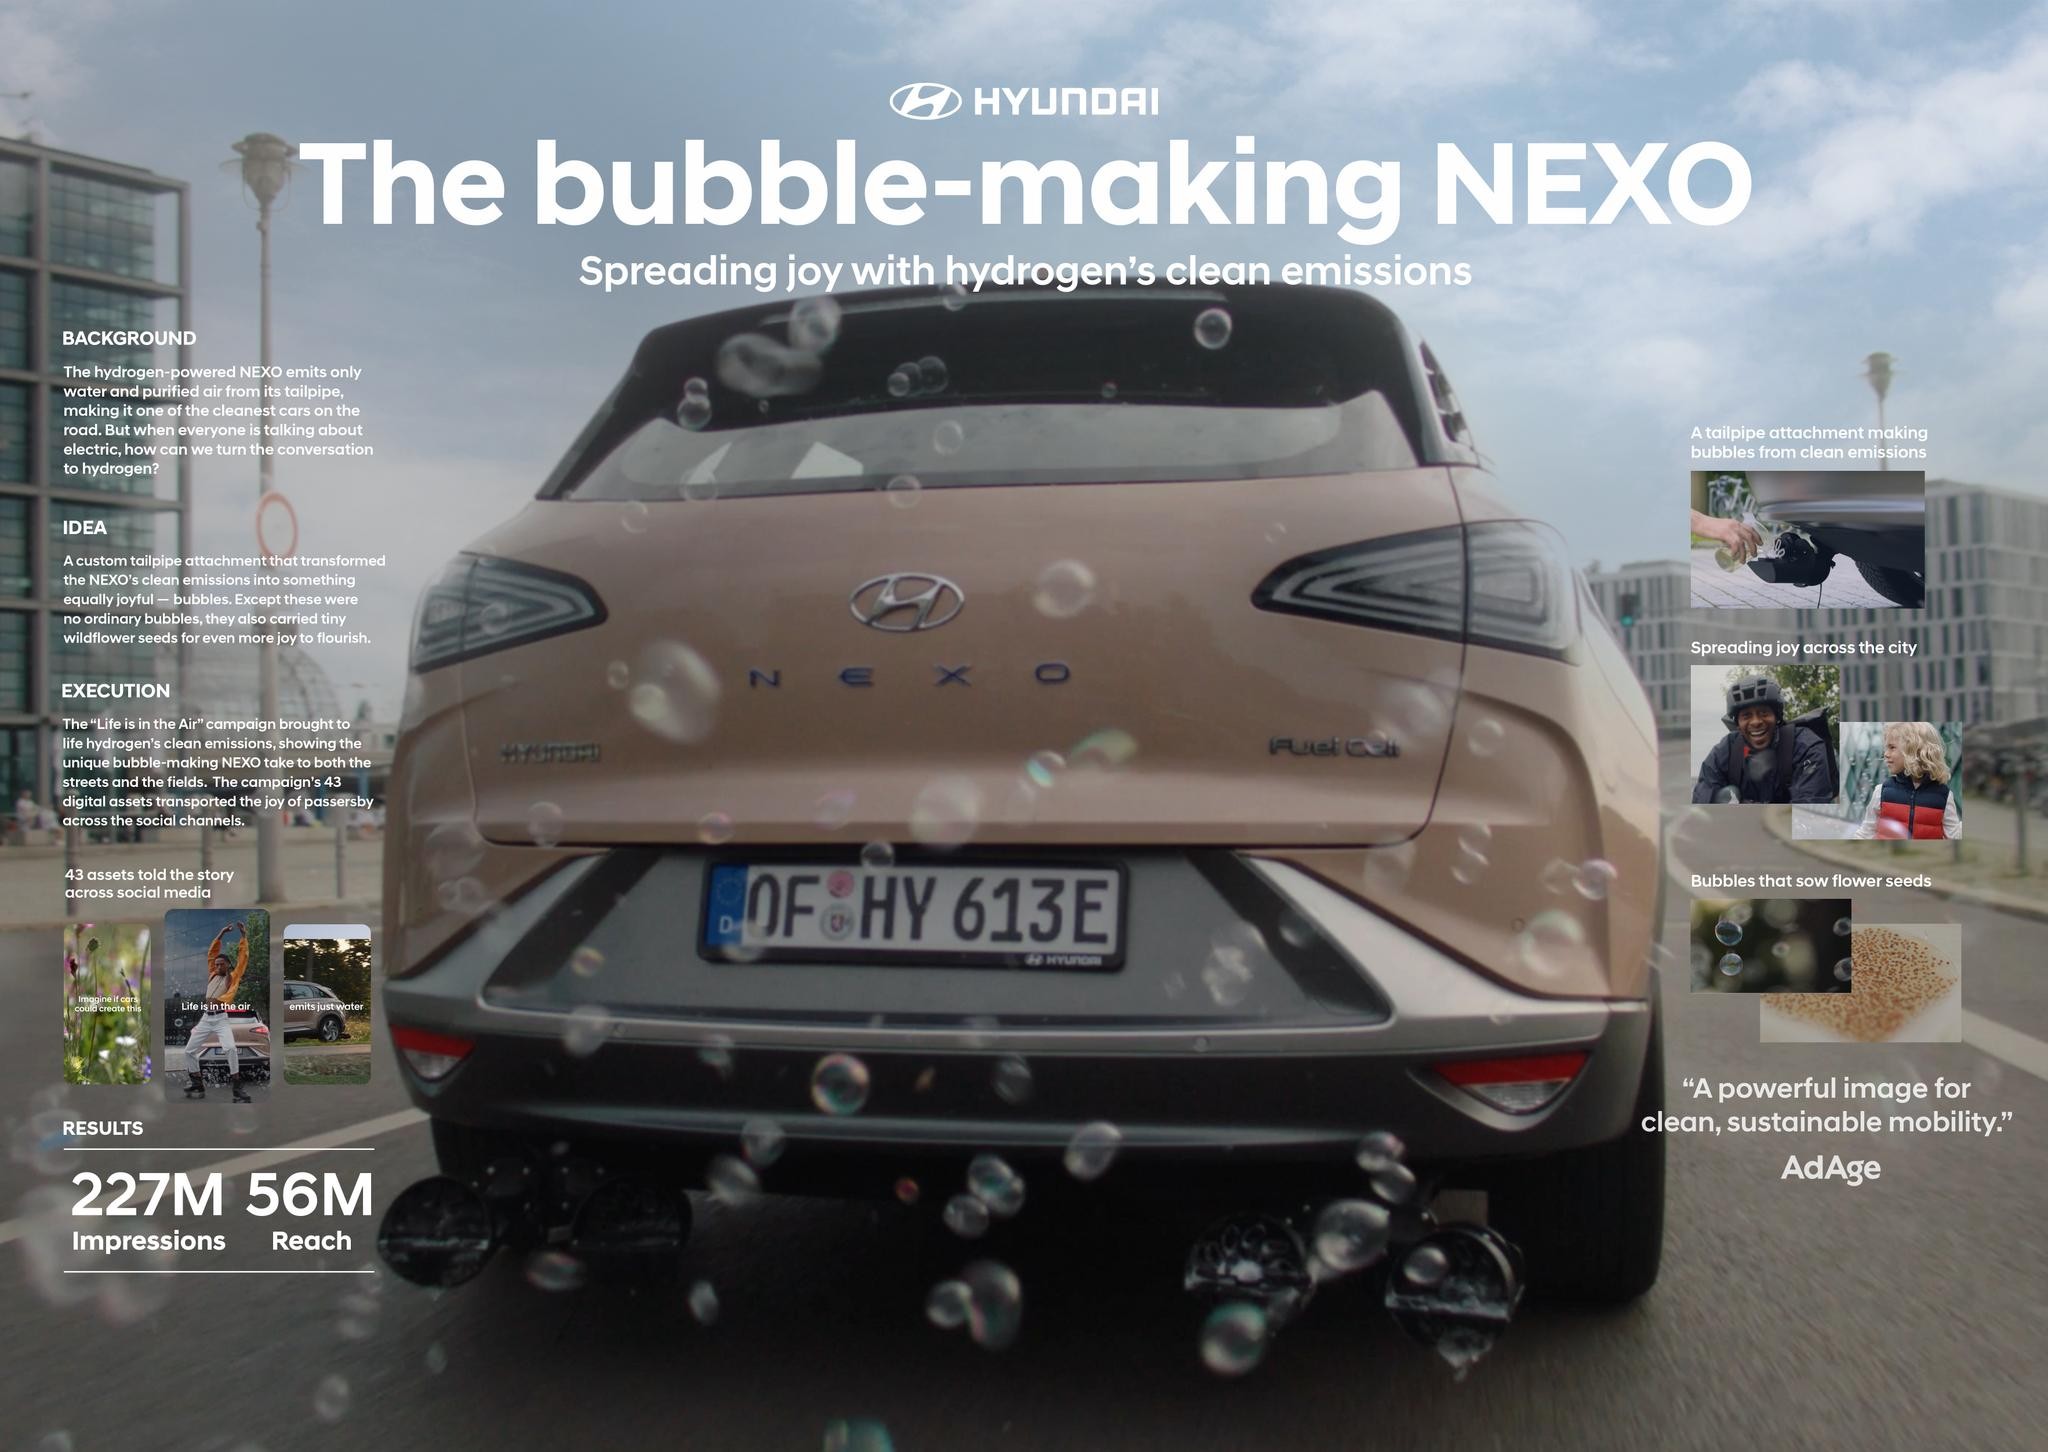 The bubble-making NEXO | Life is in the Air.